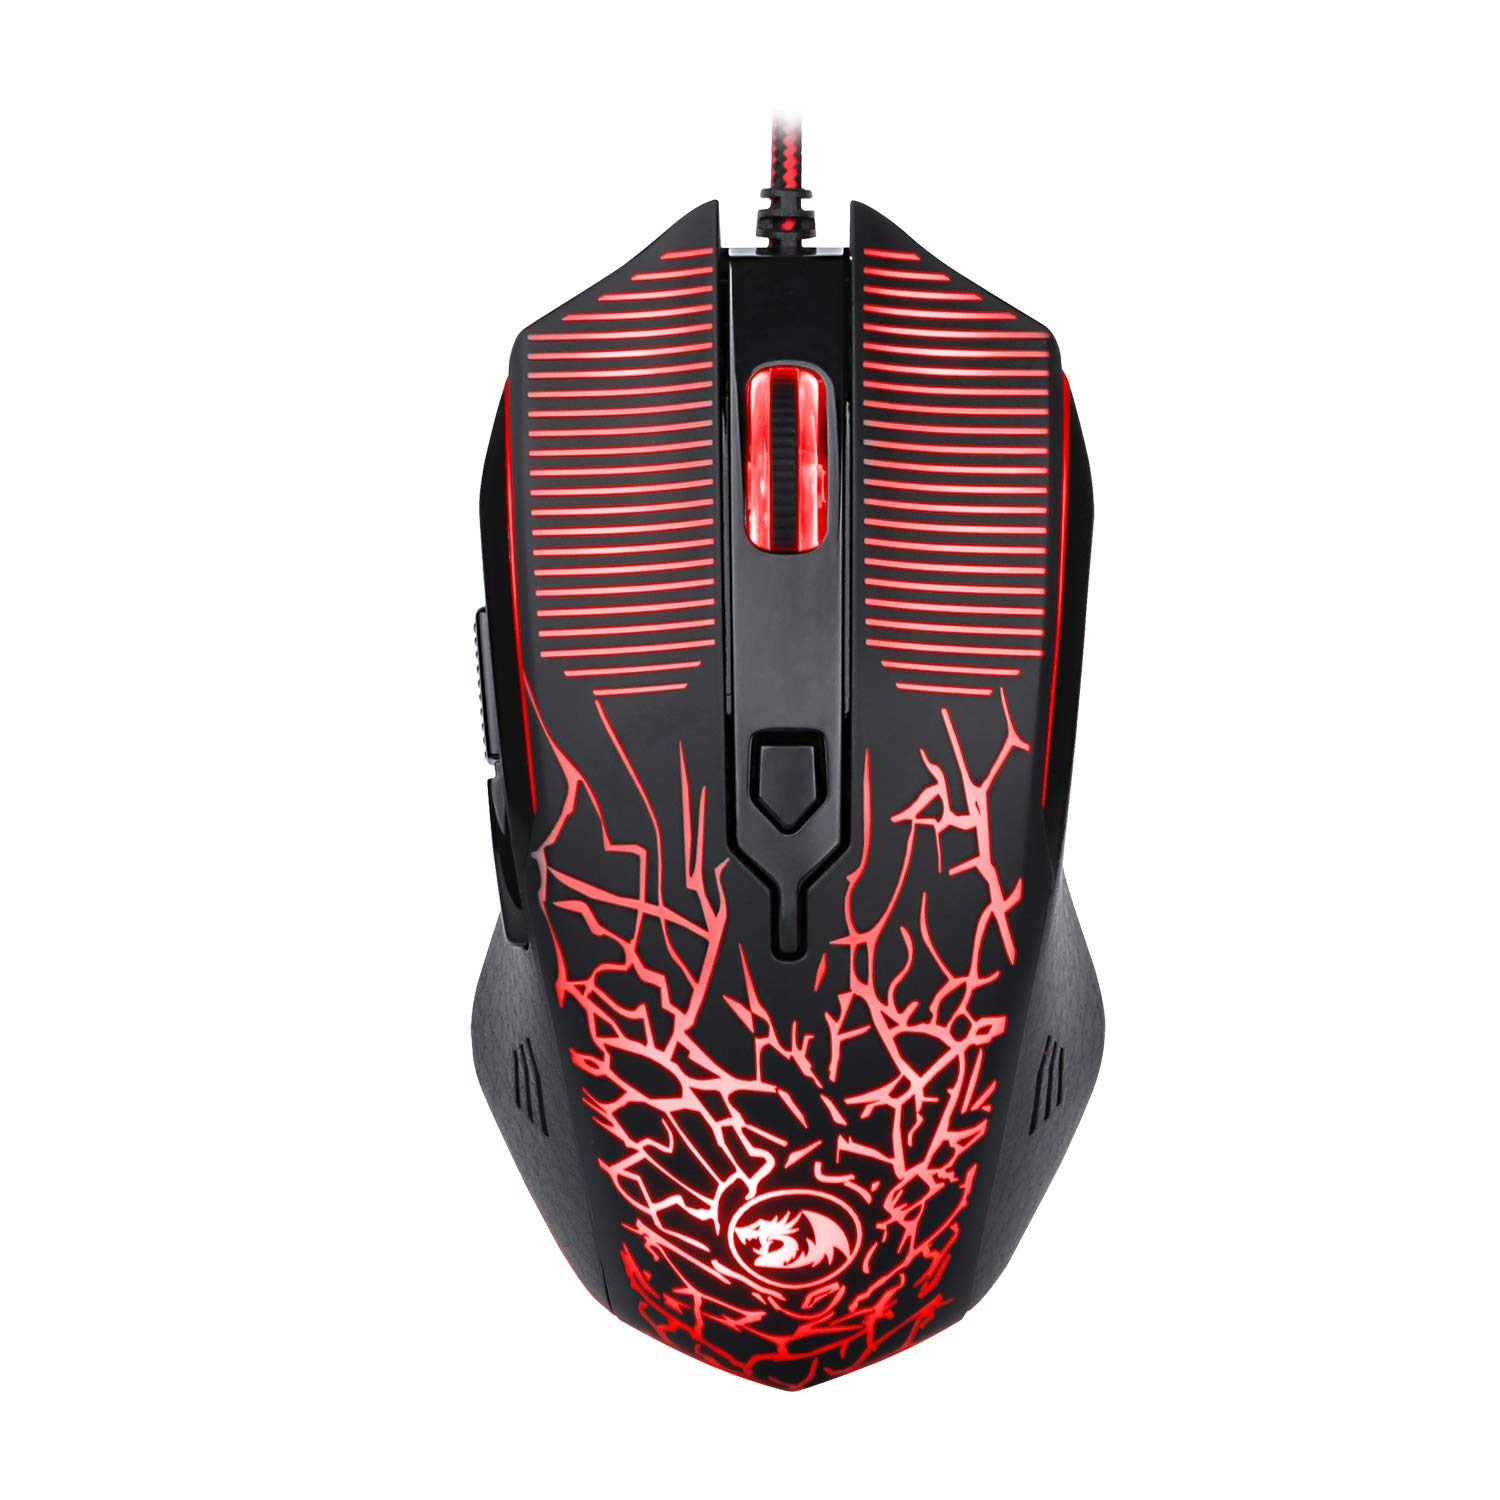  Wired Gaming Mouse Ergonomic LED Back Light PC Laptop Computer Gaming Mouse 4 LED Colors 2 Side Buttons 3200 DPI User Programmable